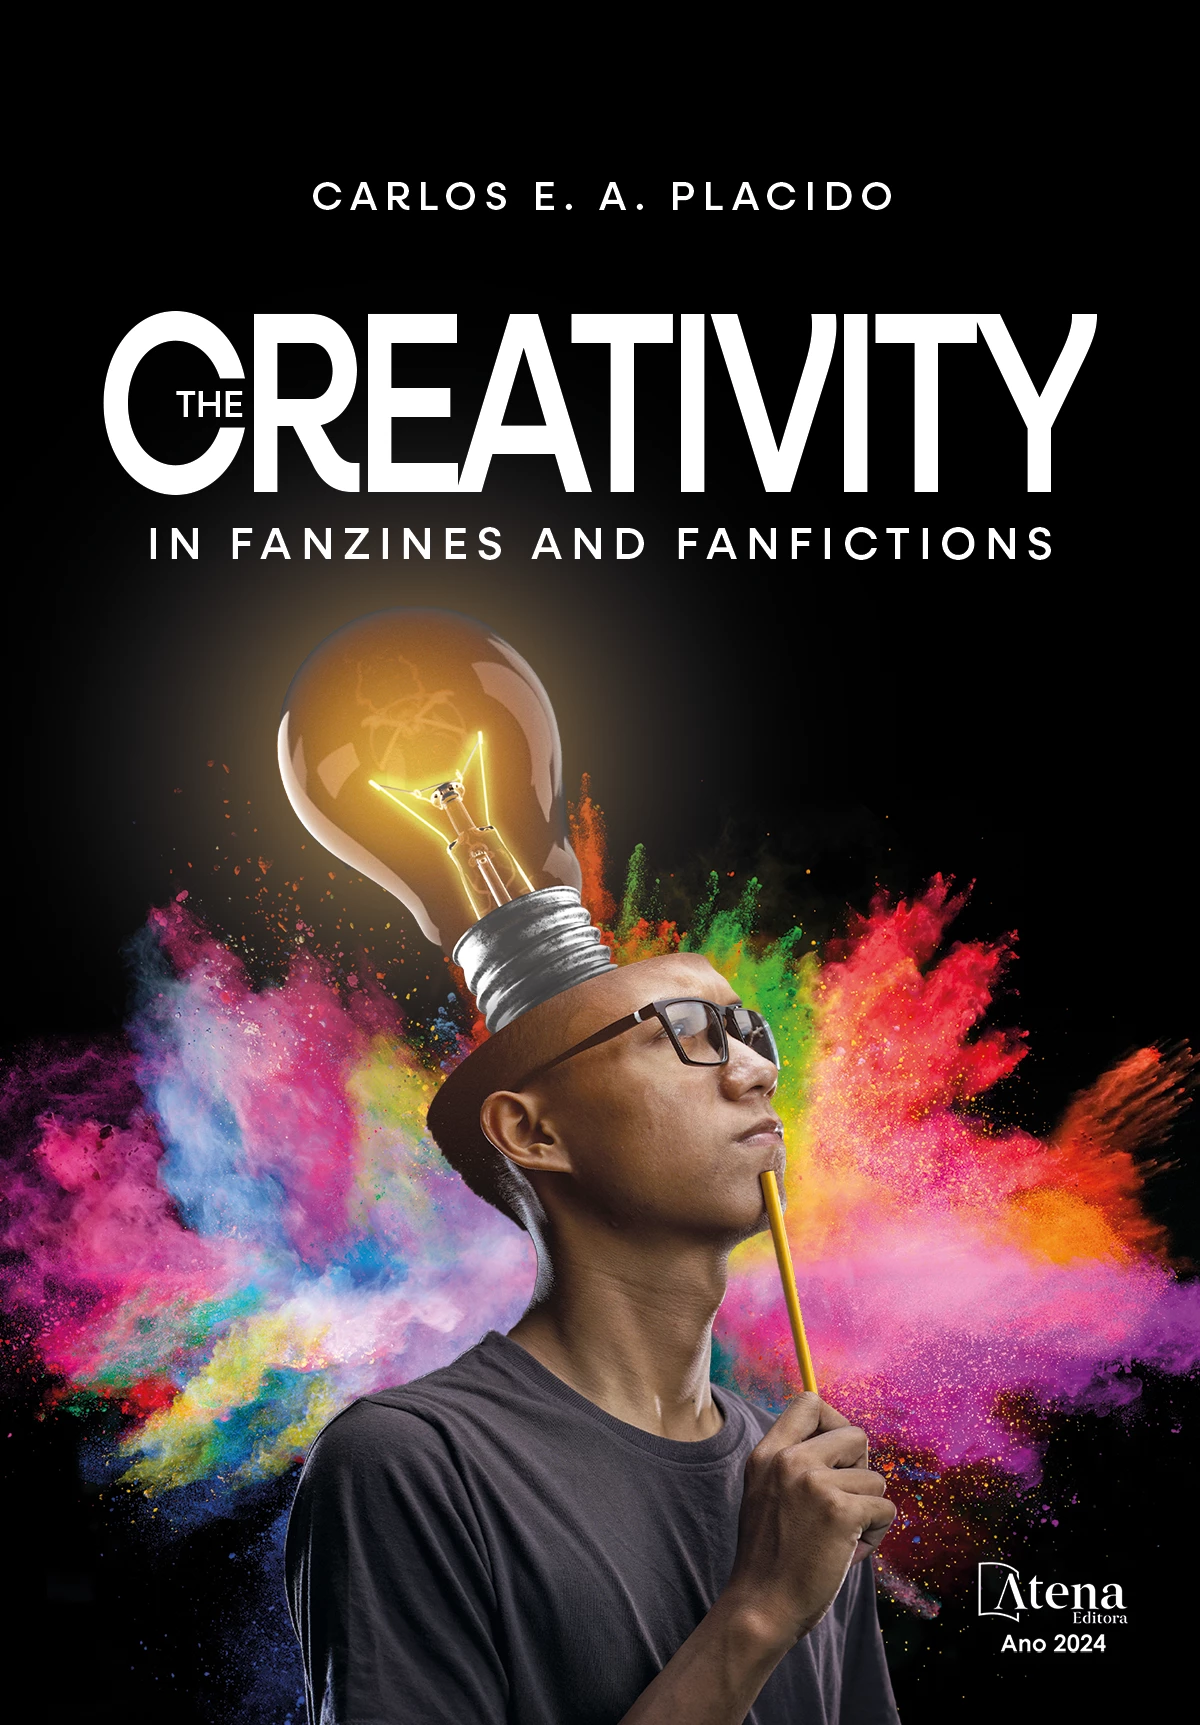 capa do ebook The creativity in fanzines and fanfictions